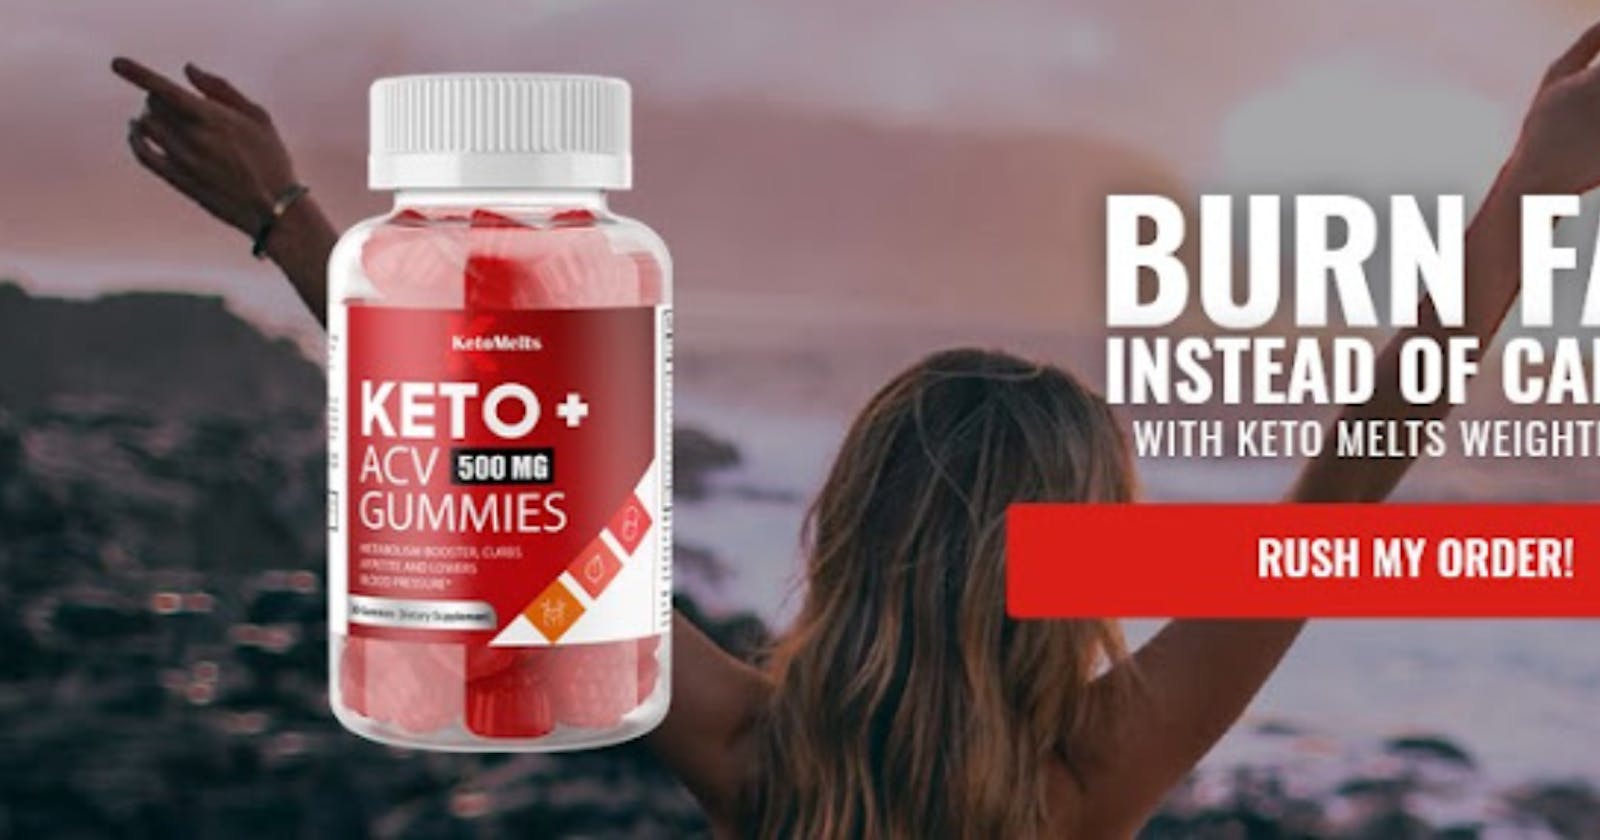 Keto Melts Keto + ACV Gummies: A Healthy Partner to Your Weight Loss Journey?